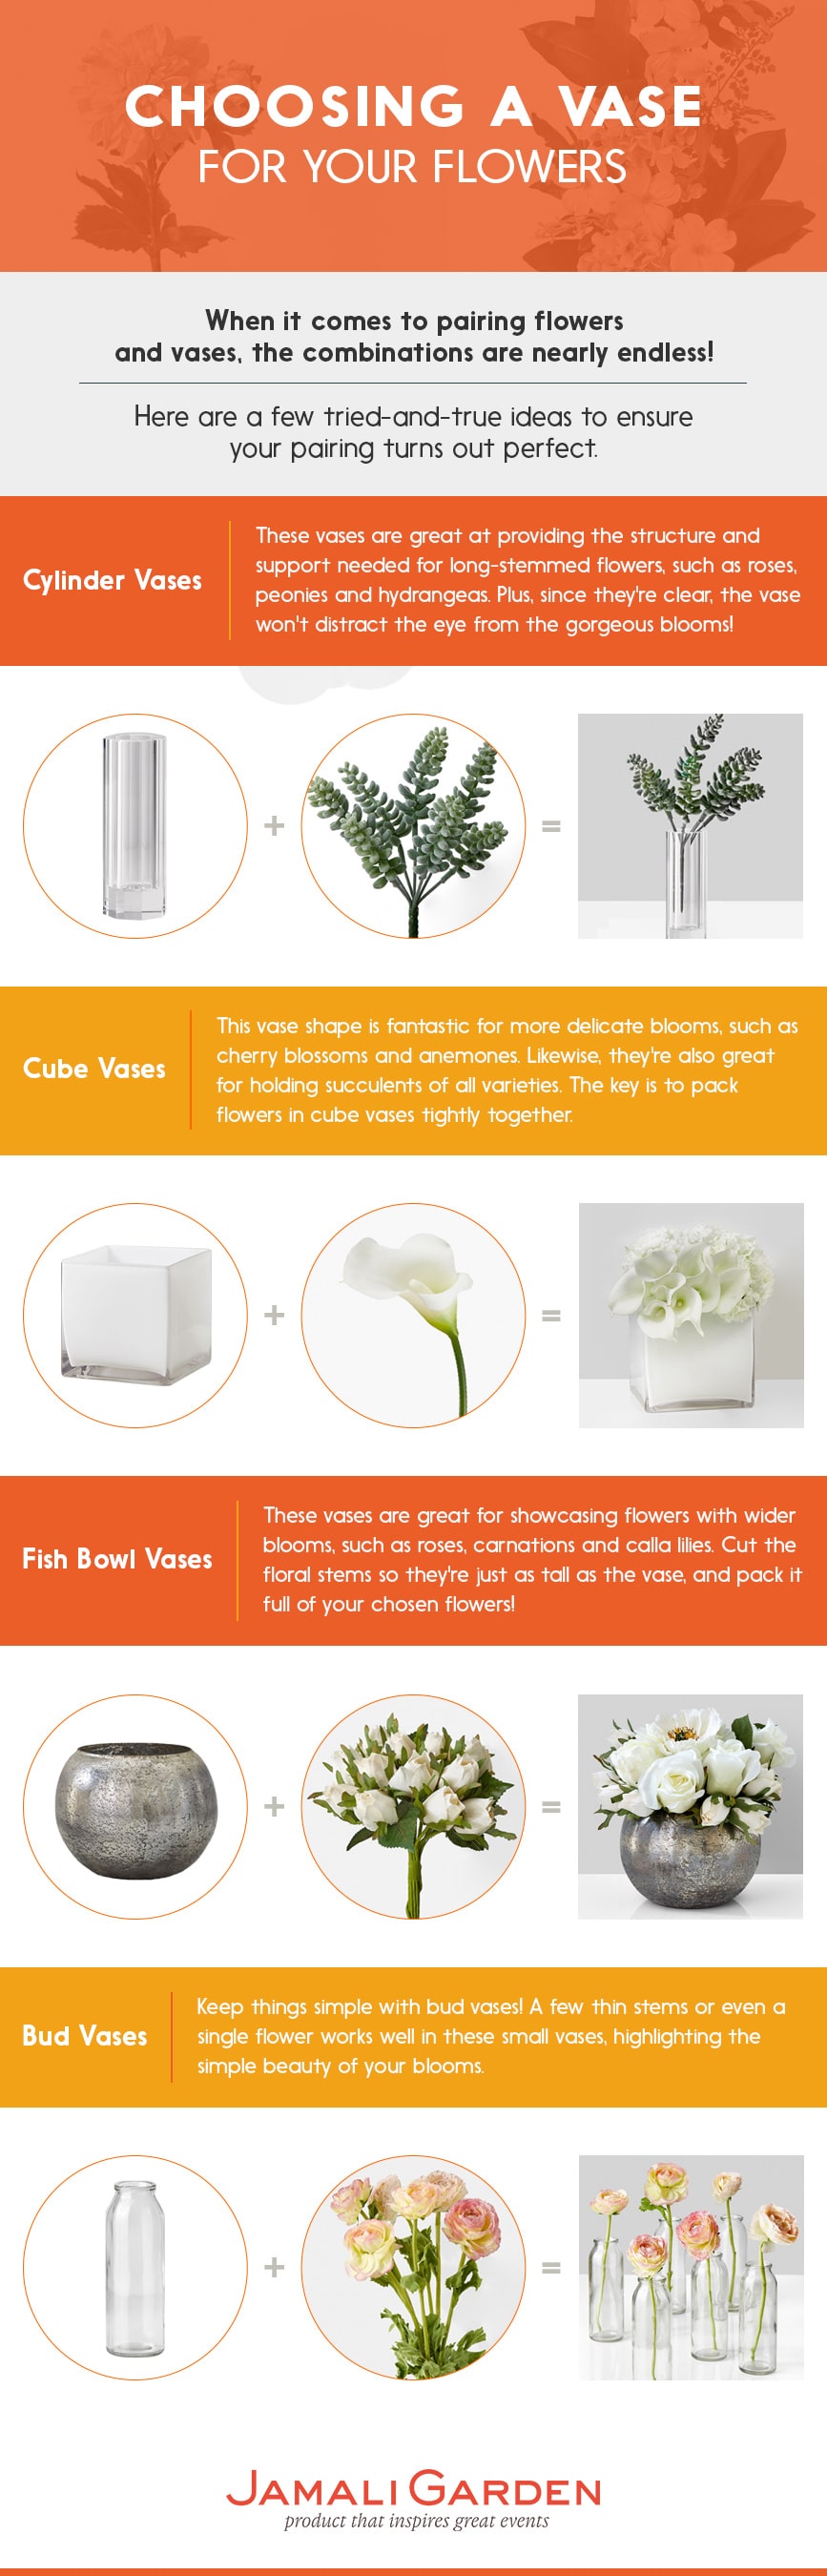 Choosing a Vase for Your Flowers